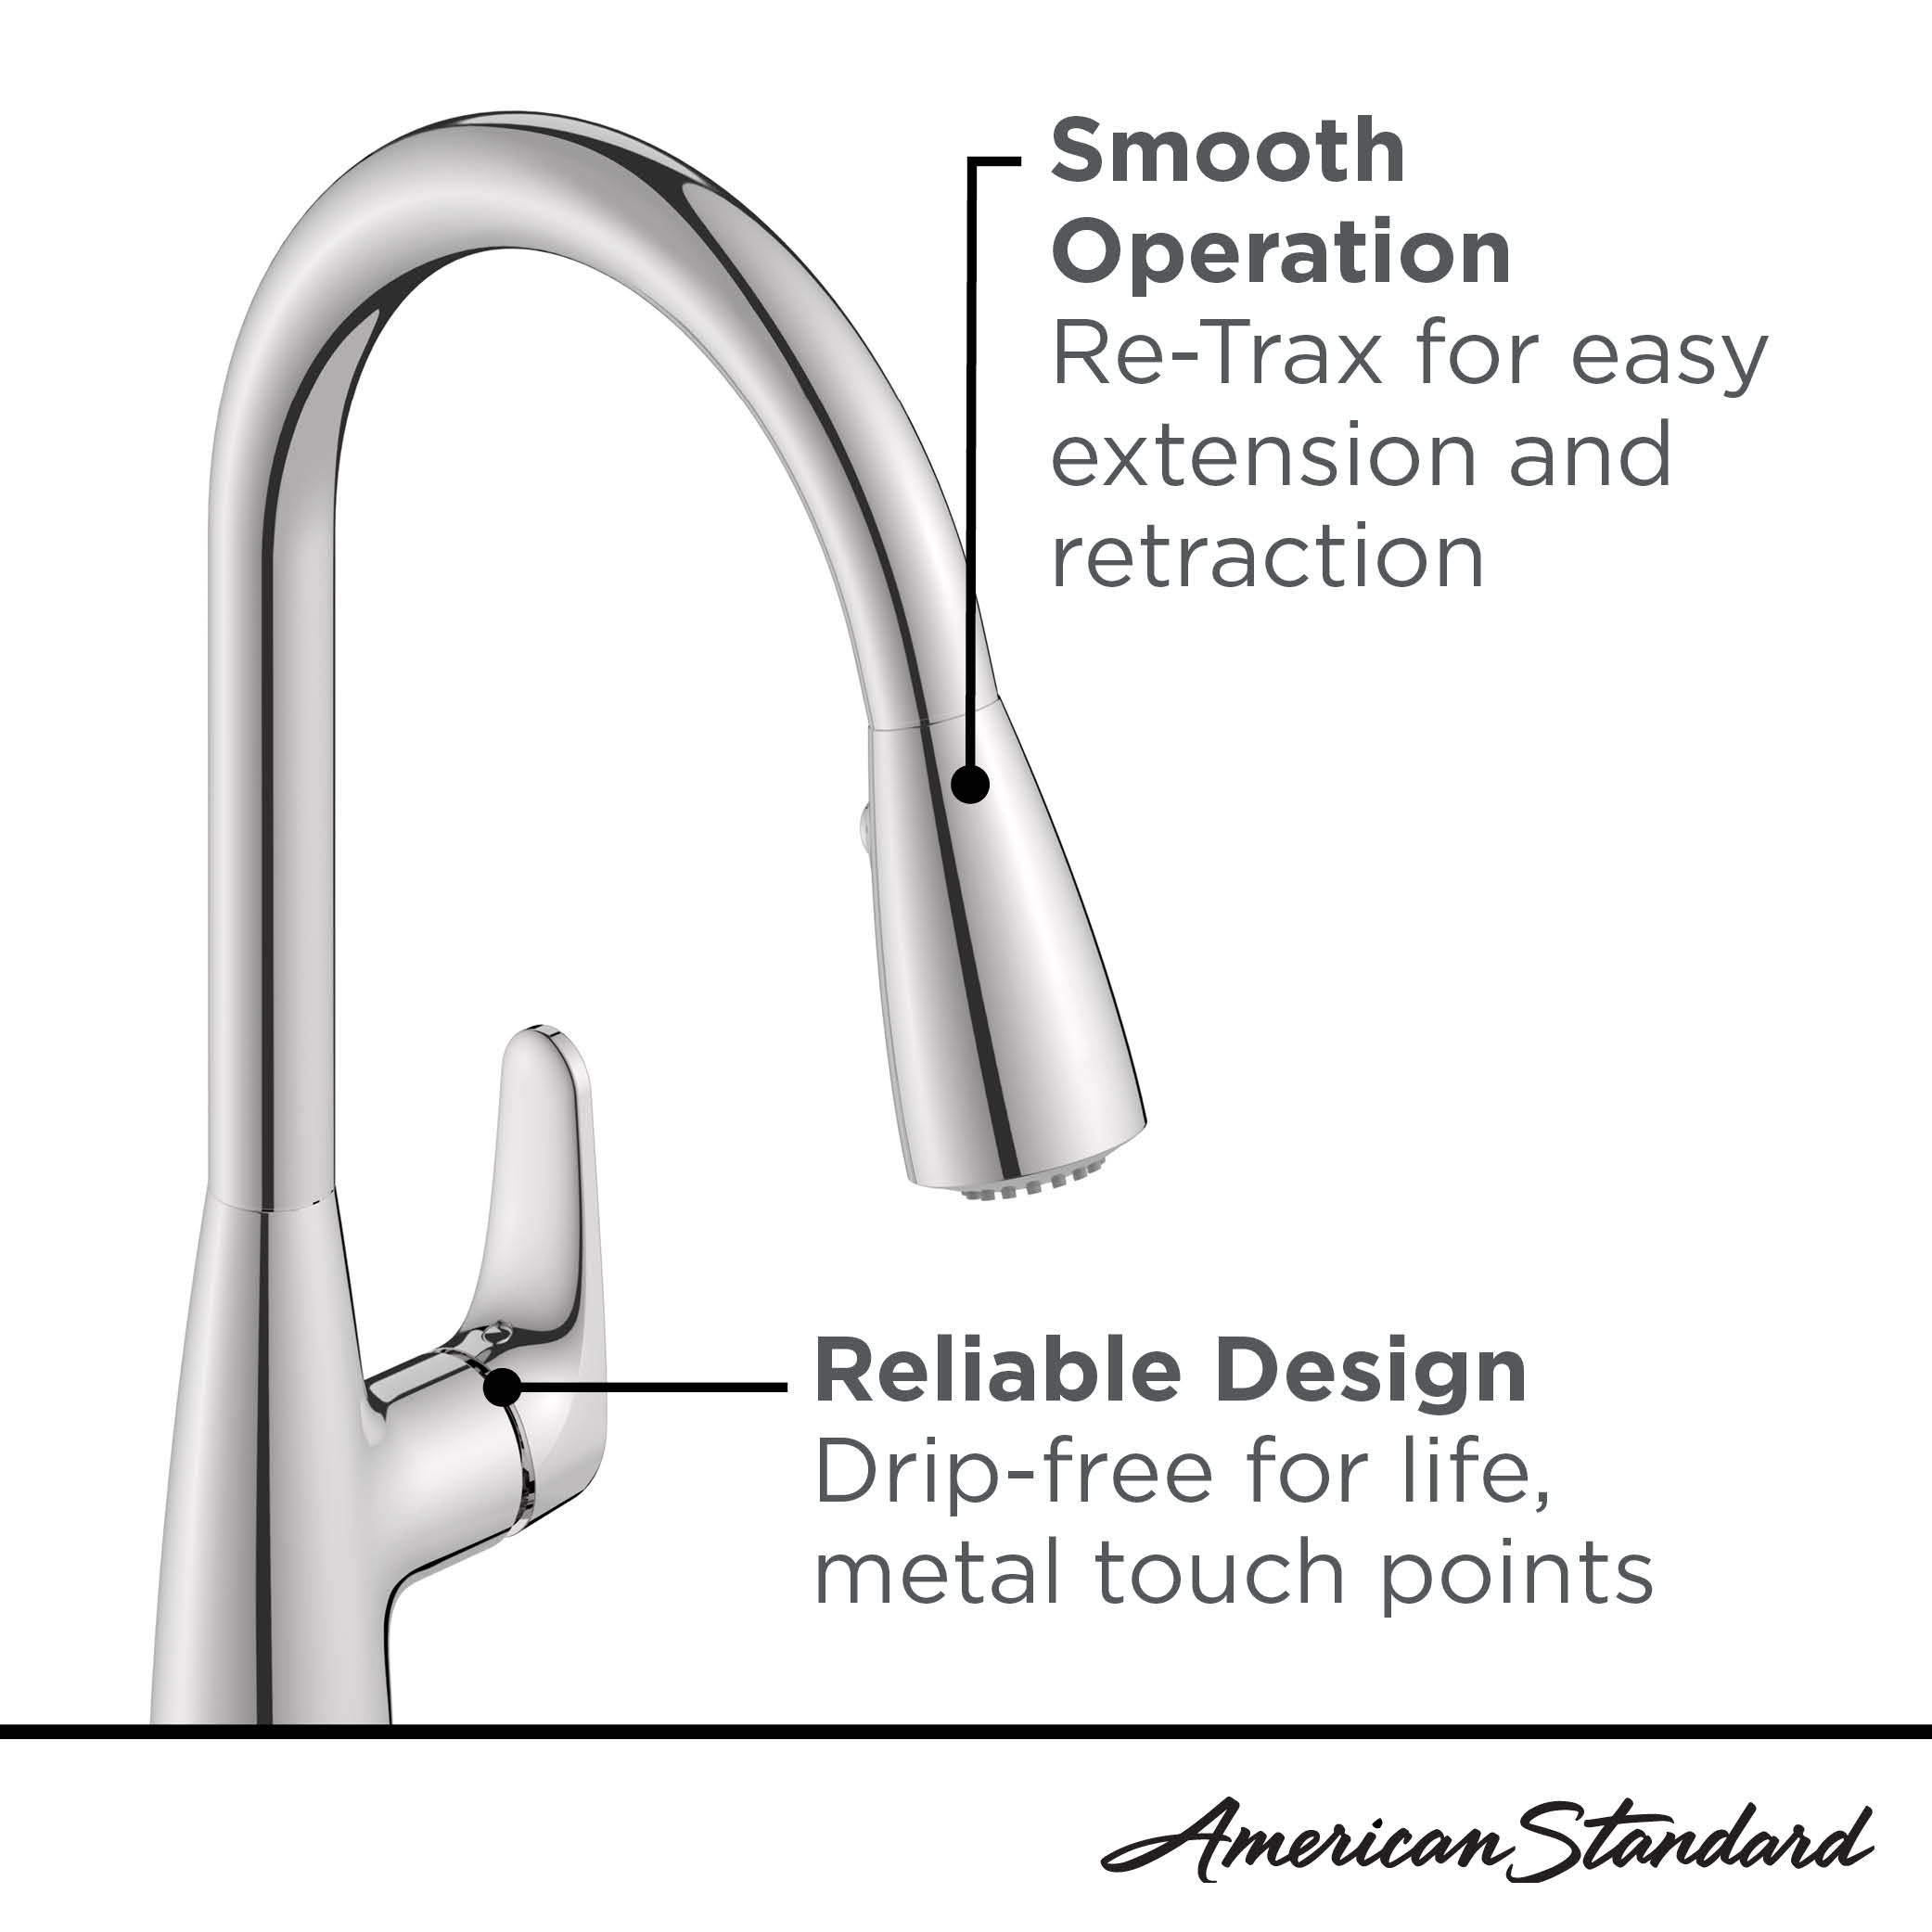 Colony® PRO Touchless Single-Handle Pull-Down Dual Spray Kitchen Faucet 1.5 gpm/5.7 L/min